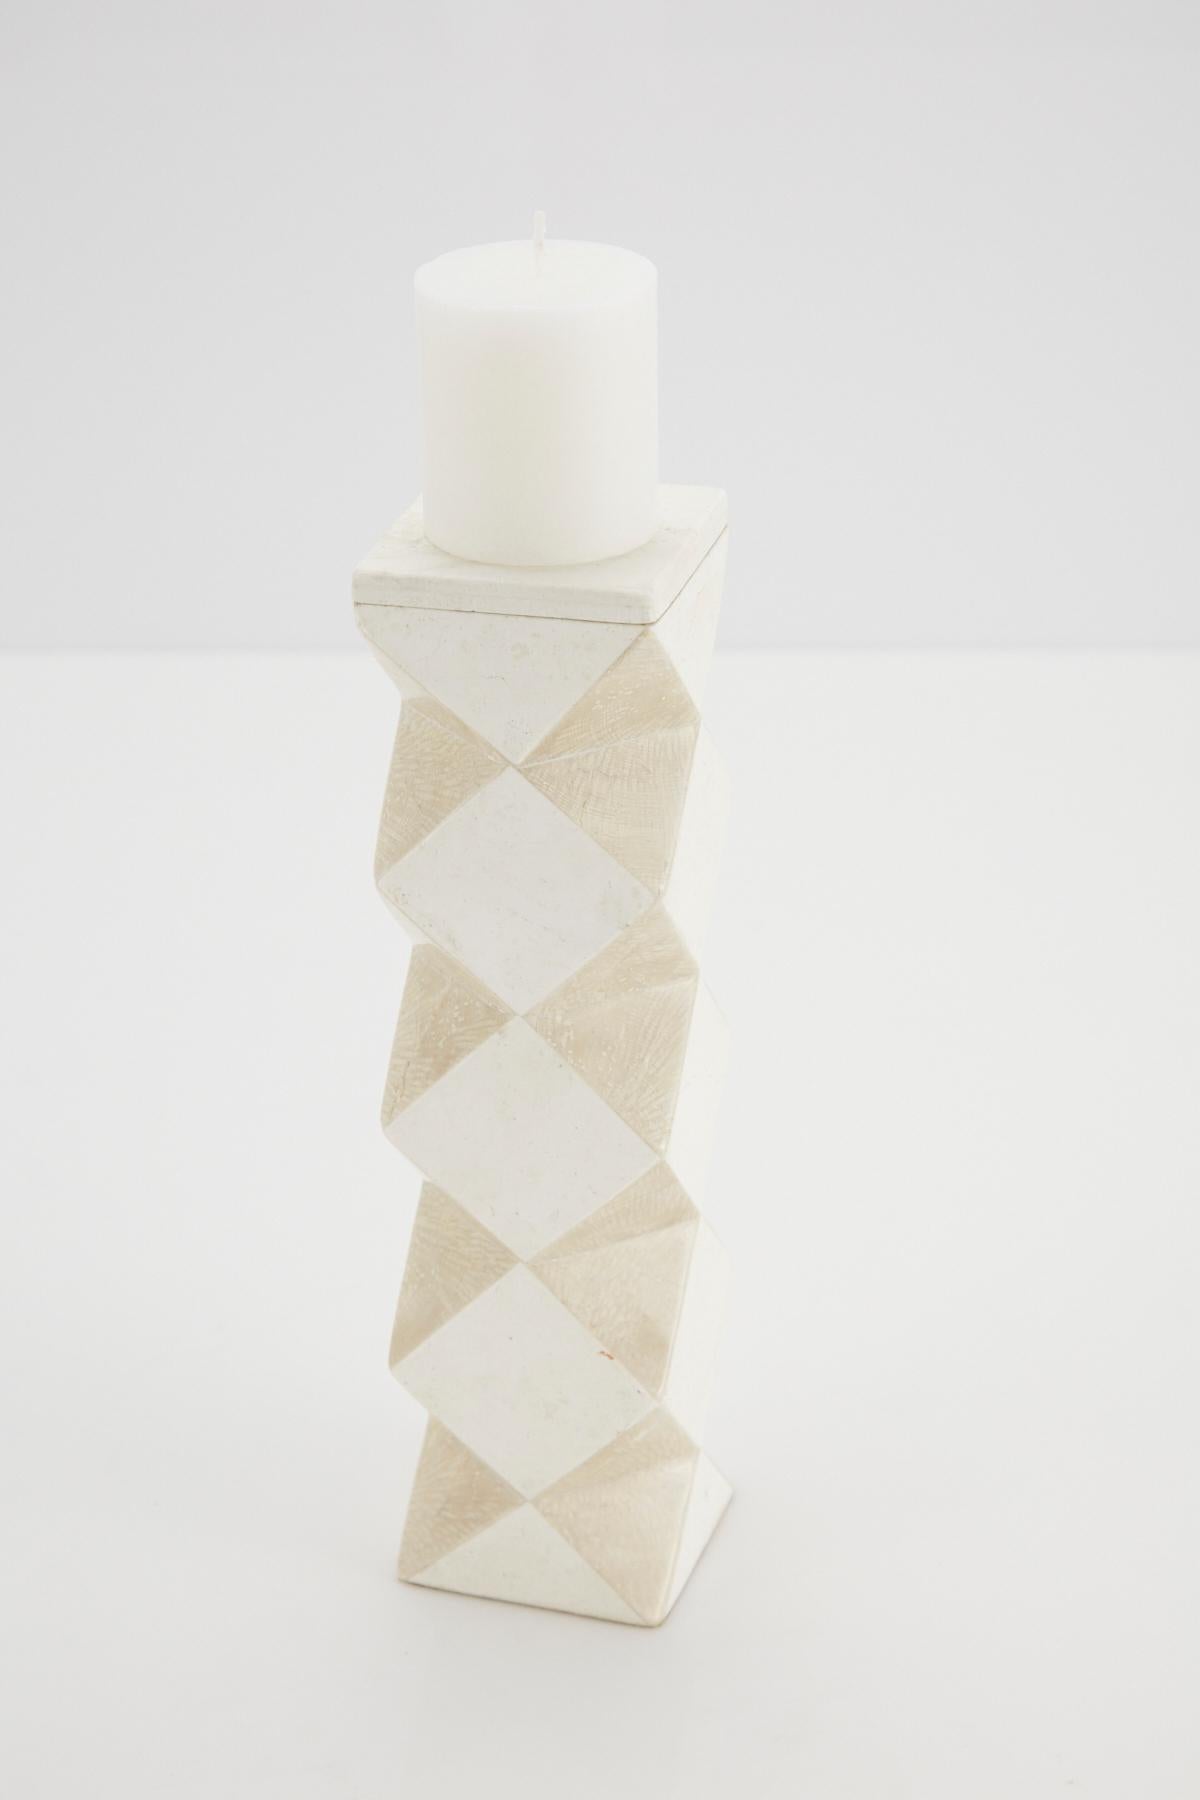 Medium-sized pillar candleholder. Body is comprised of a rectilinear cube with faceted sides, alternating white and beige tessellated stone. The top of this convertible candlestick is removable and can then be used as a vase.

All furnishings are